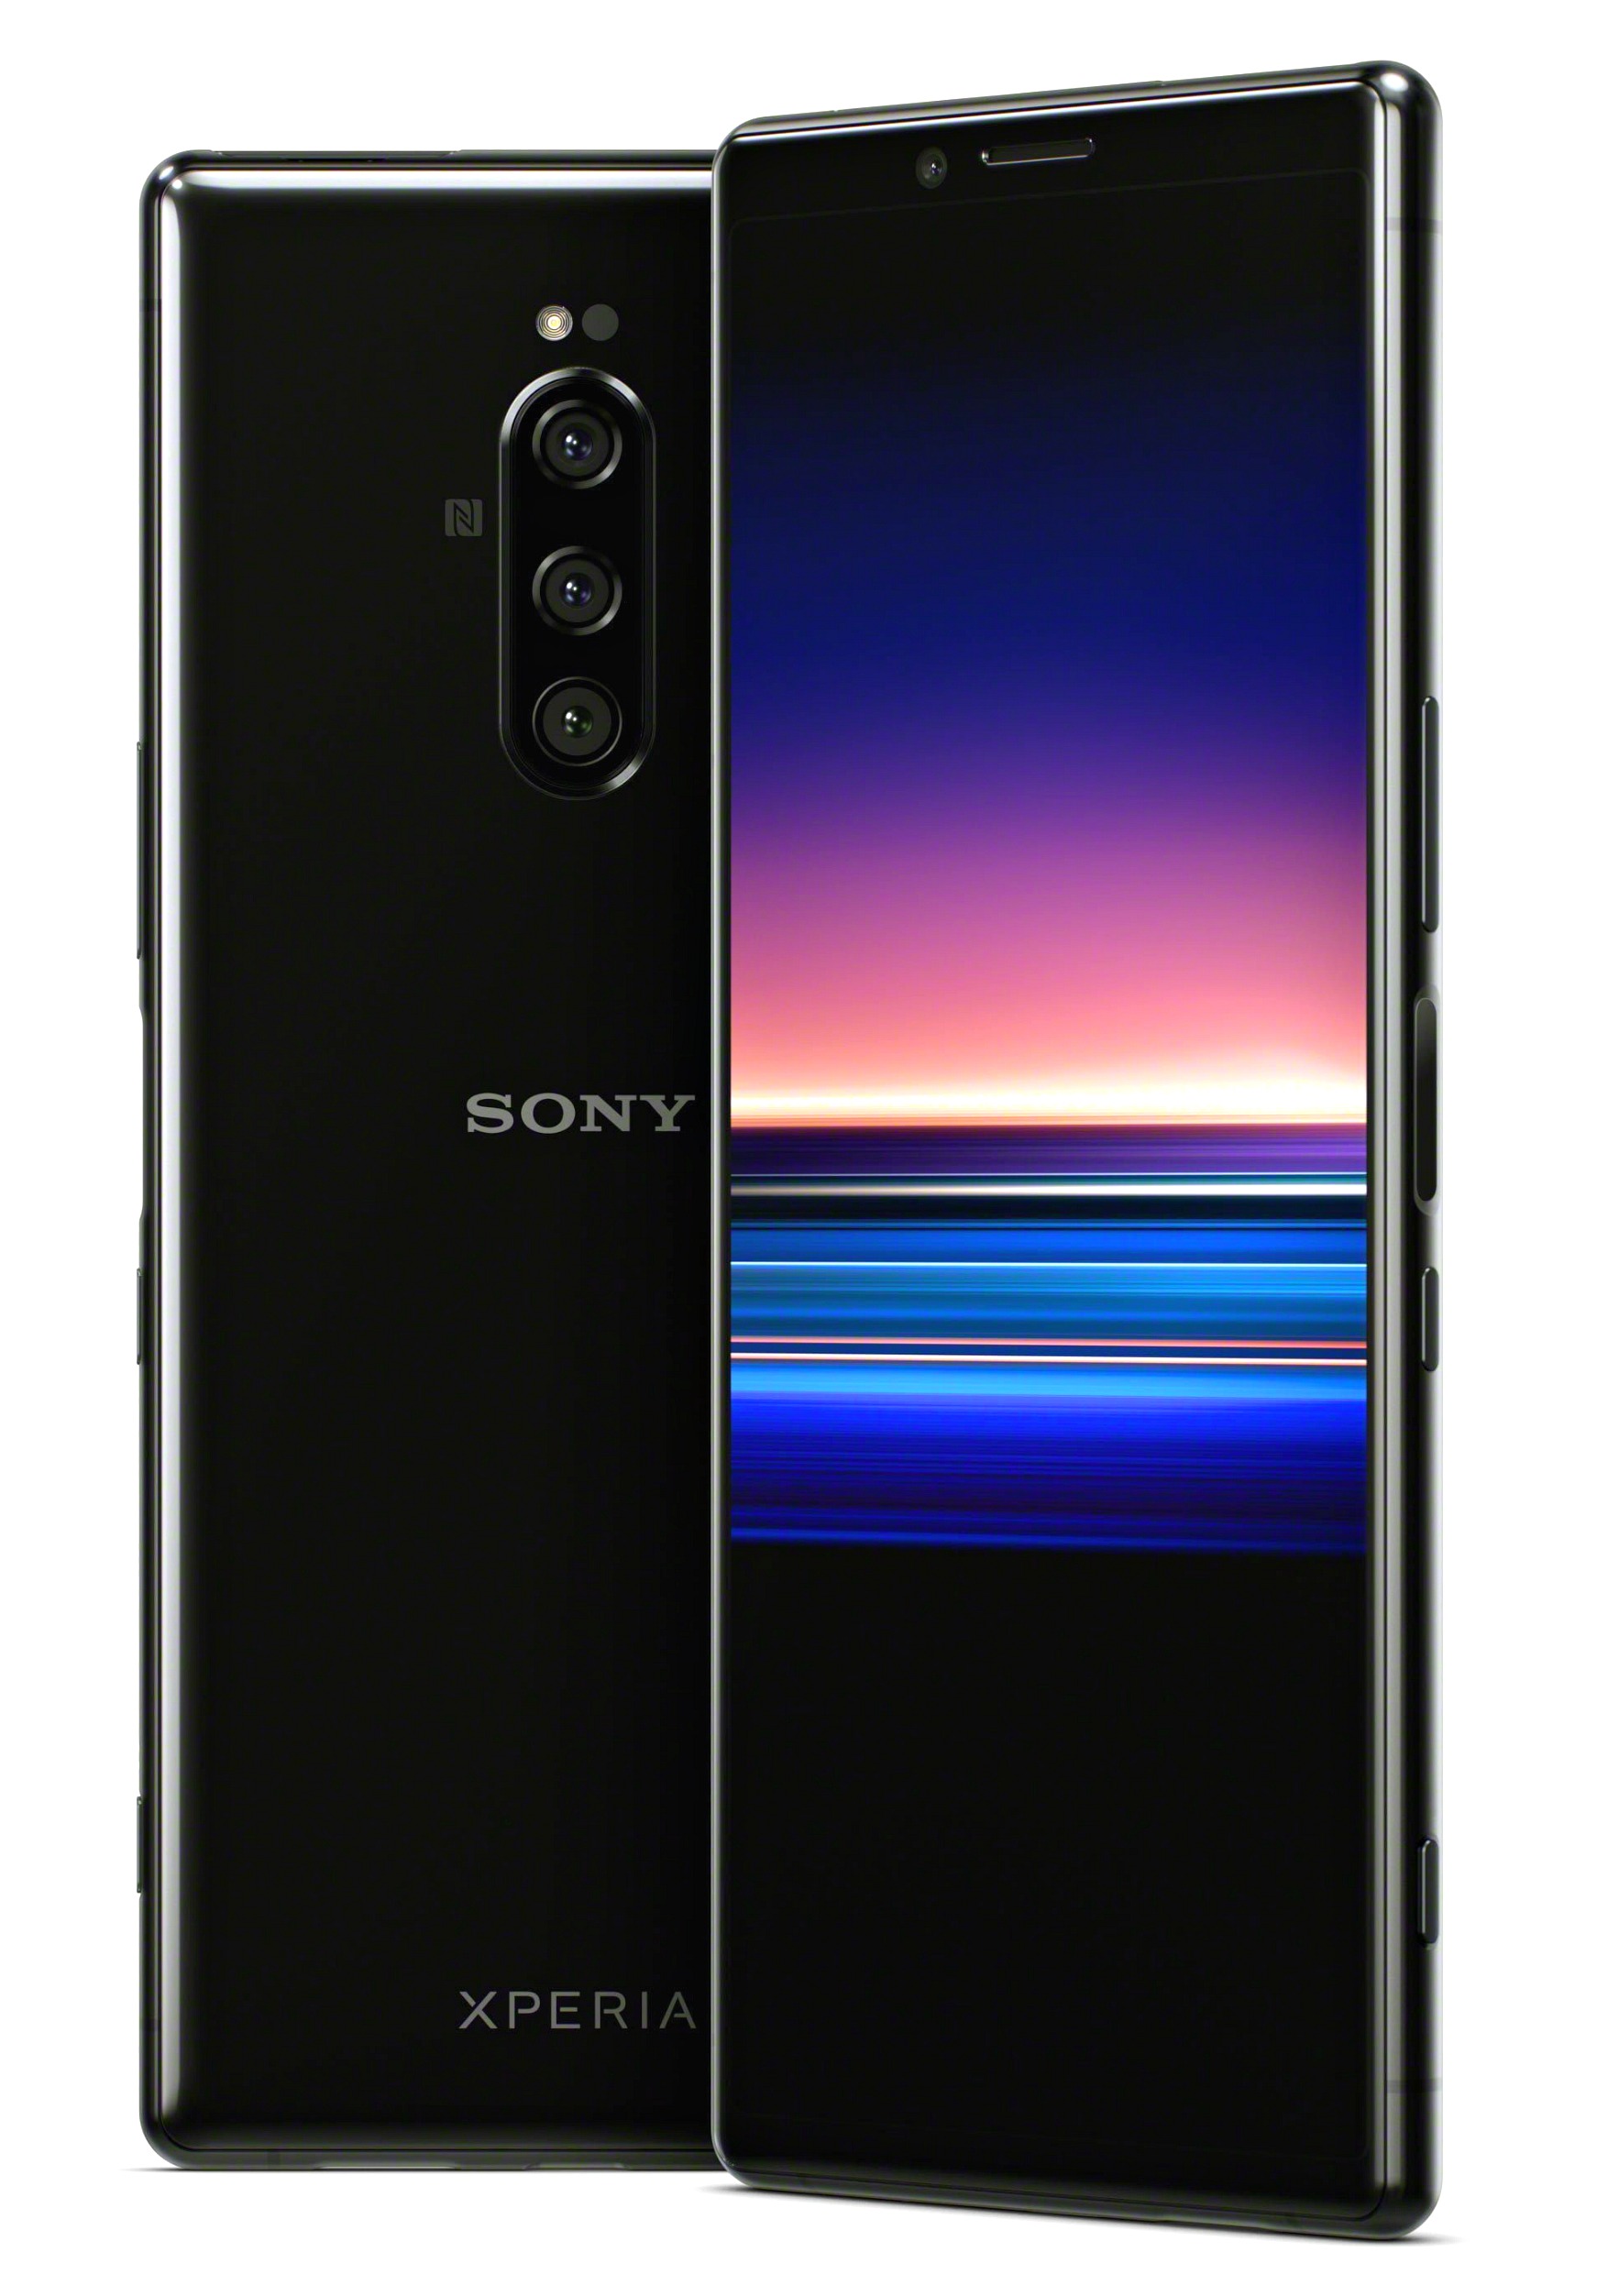 Xperia 1 is made out of metal and glass